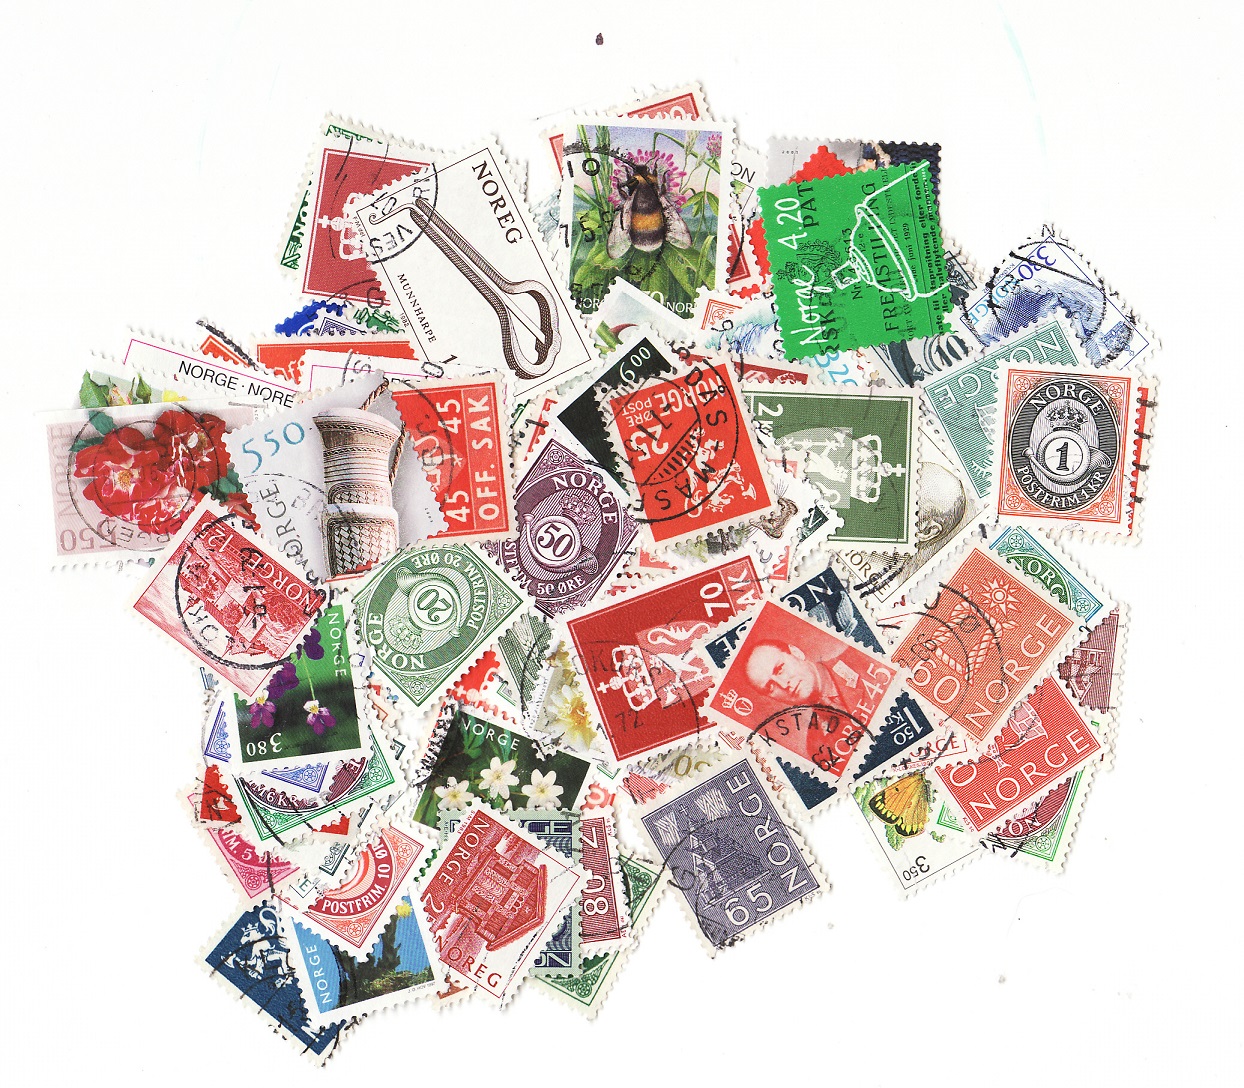 Norway Stamp Packet, 100 different stamps from Norway